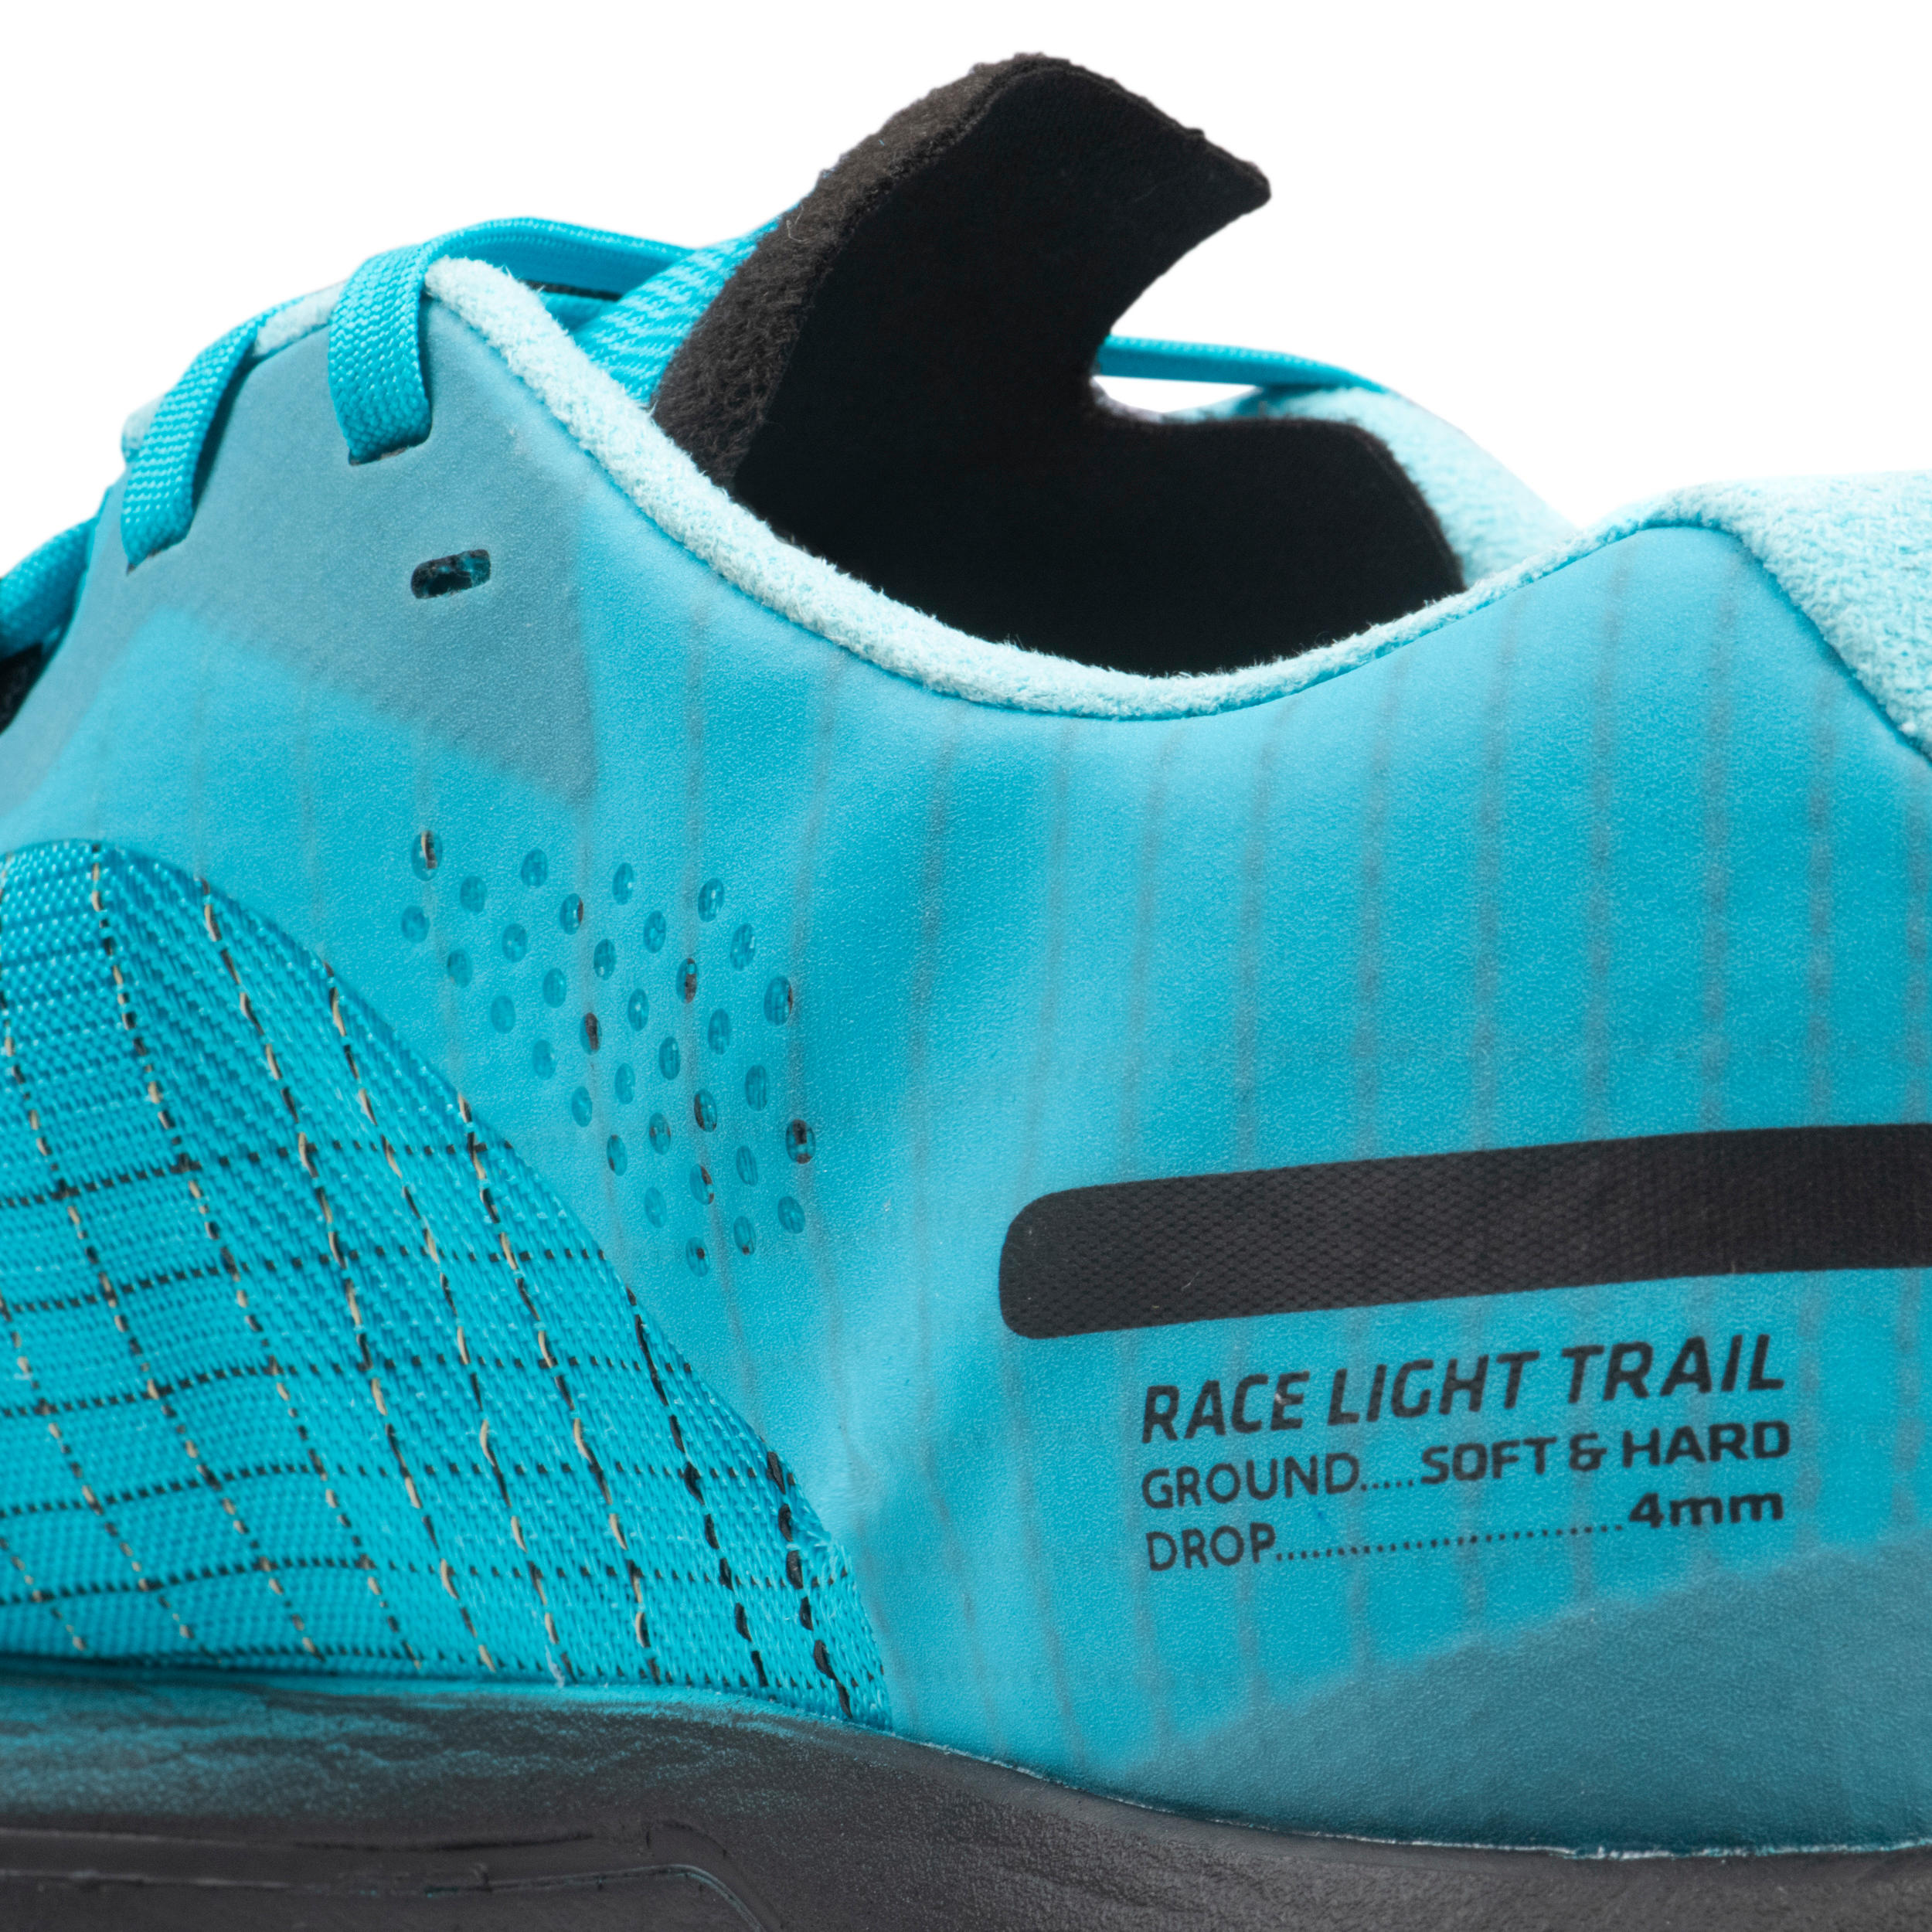 Race Light Men's Trail Running Shoes - sky blue and black 11/15